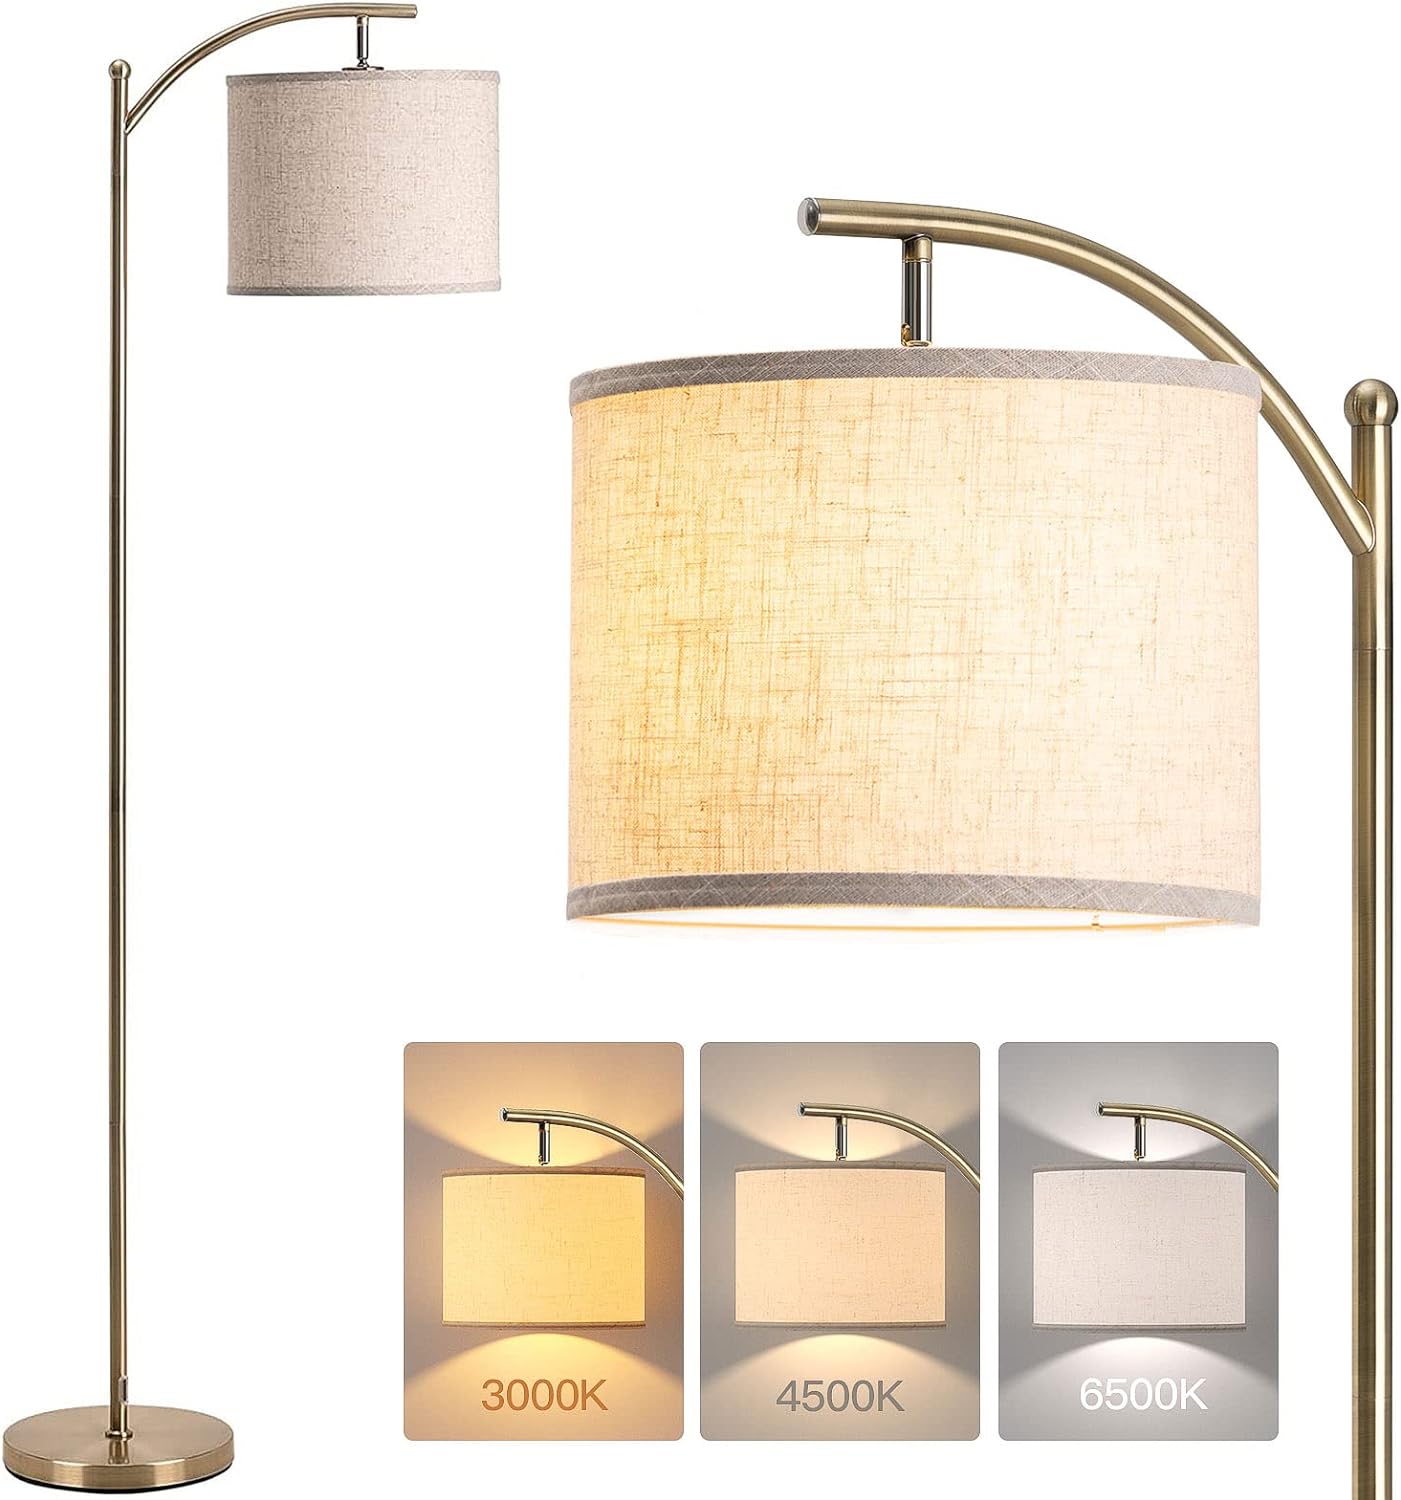 Limited-Time Specials: Addlon Floor Lamp with 3 Color Temperatures - Save 29% Today!